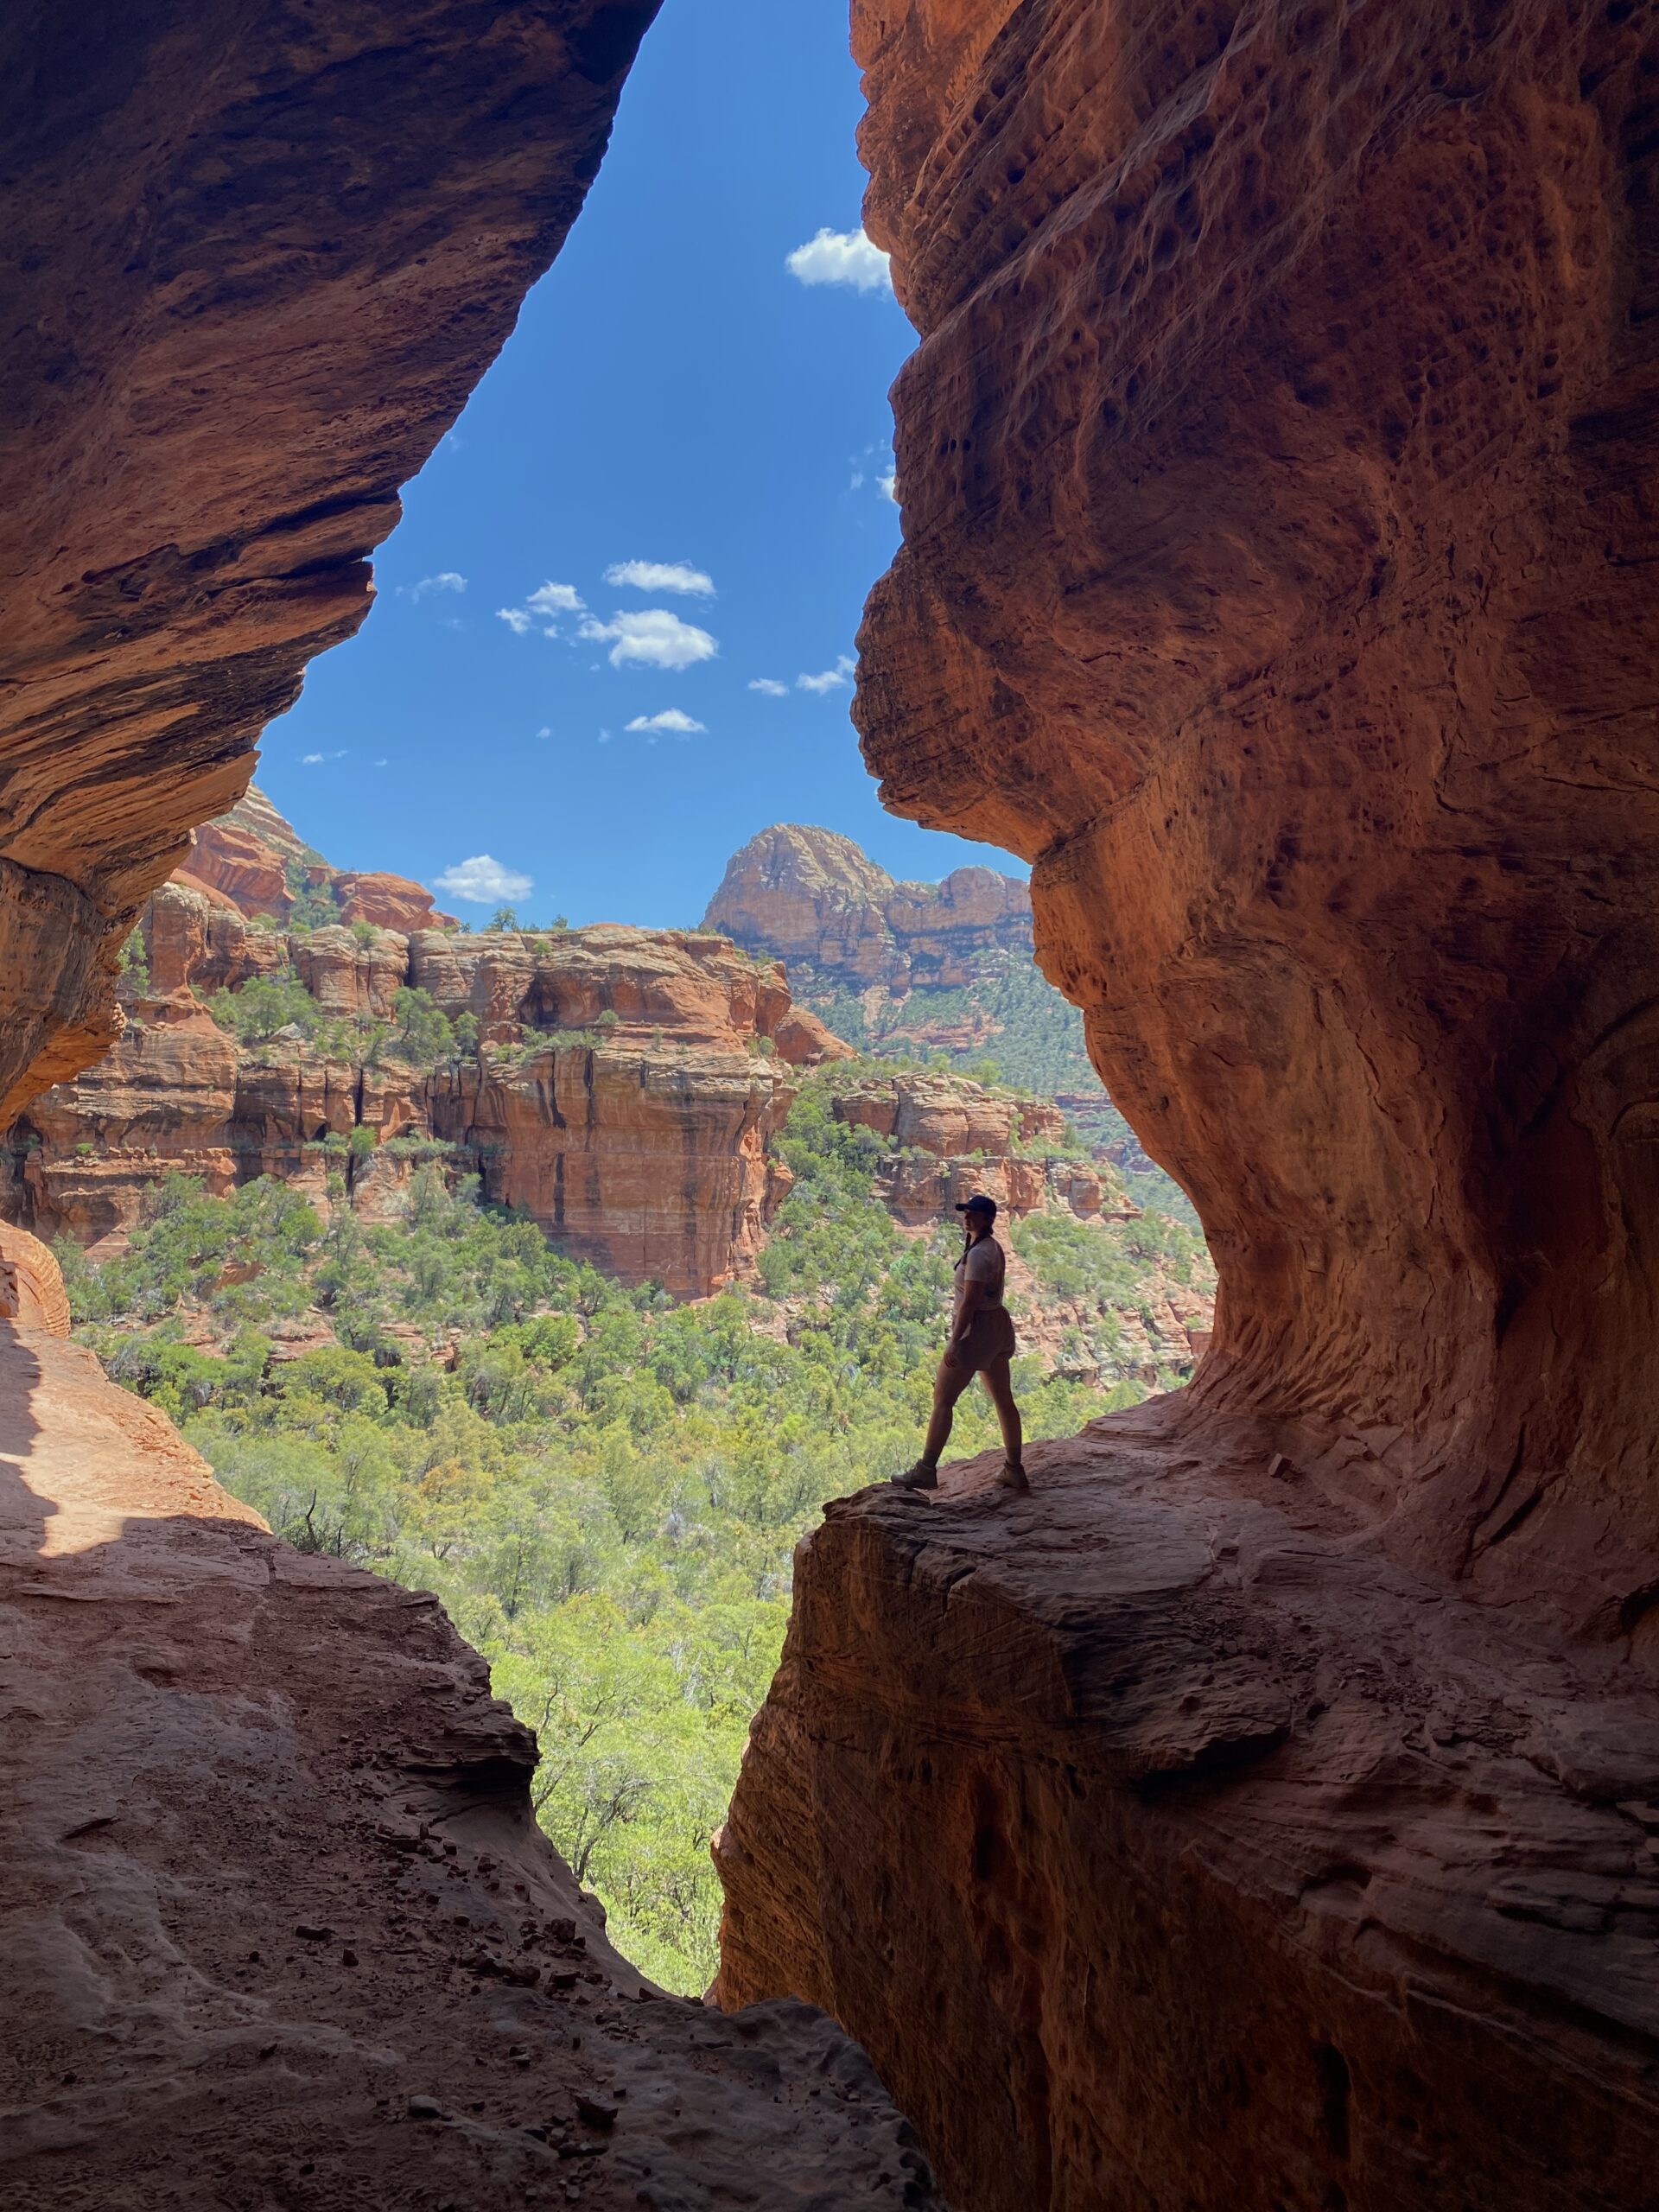 Boynton Canyon Trail and The Subway Cave: A Sedona Hike Review